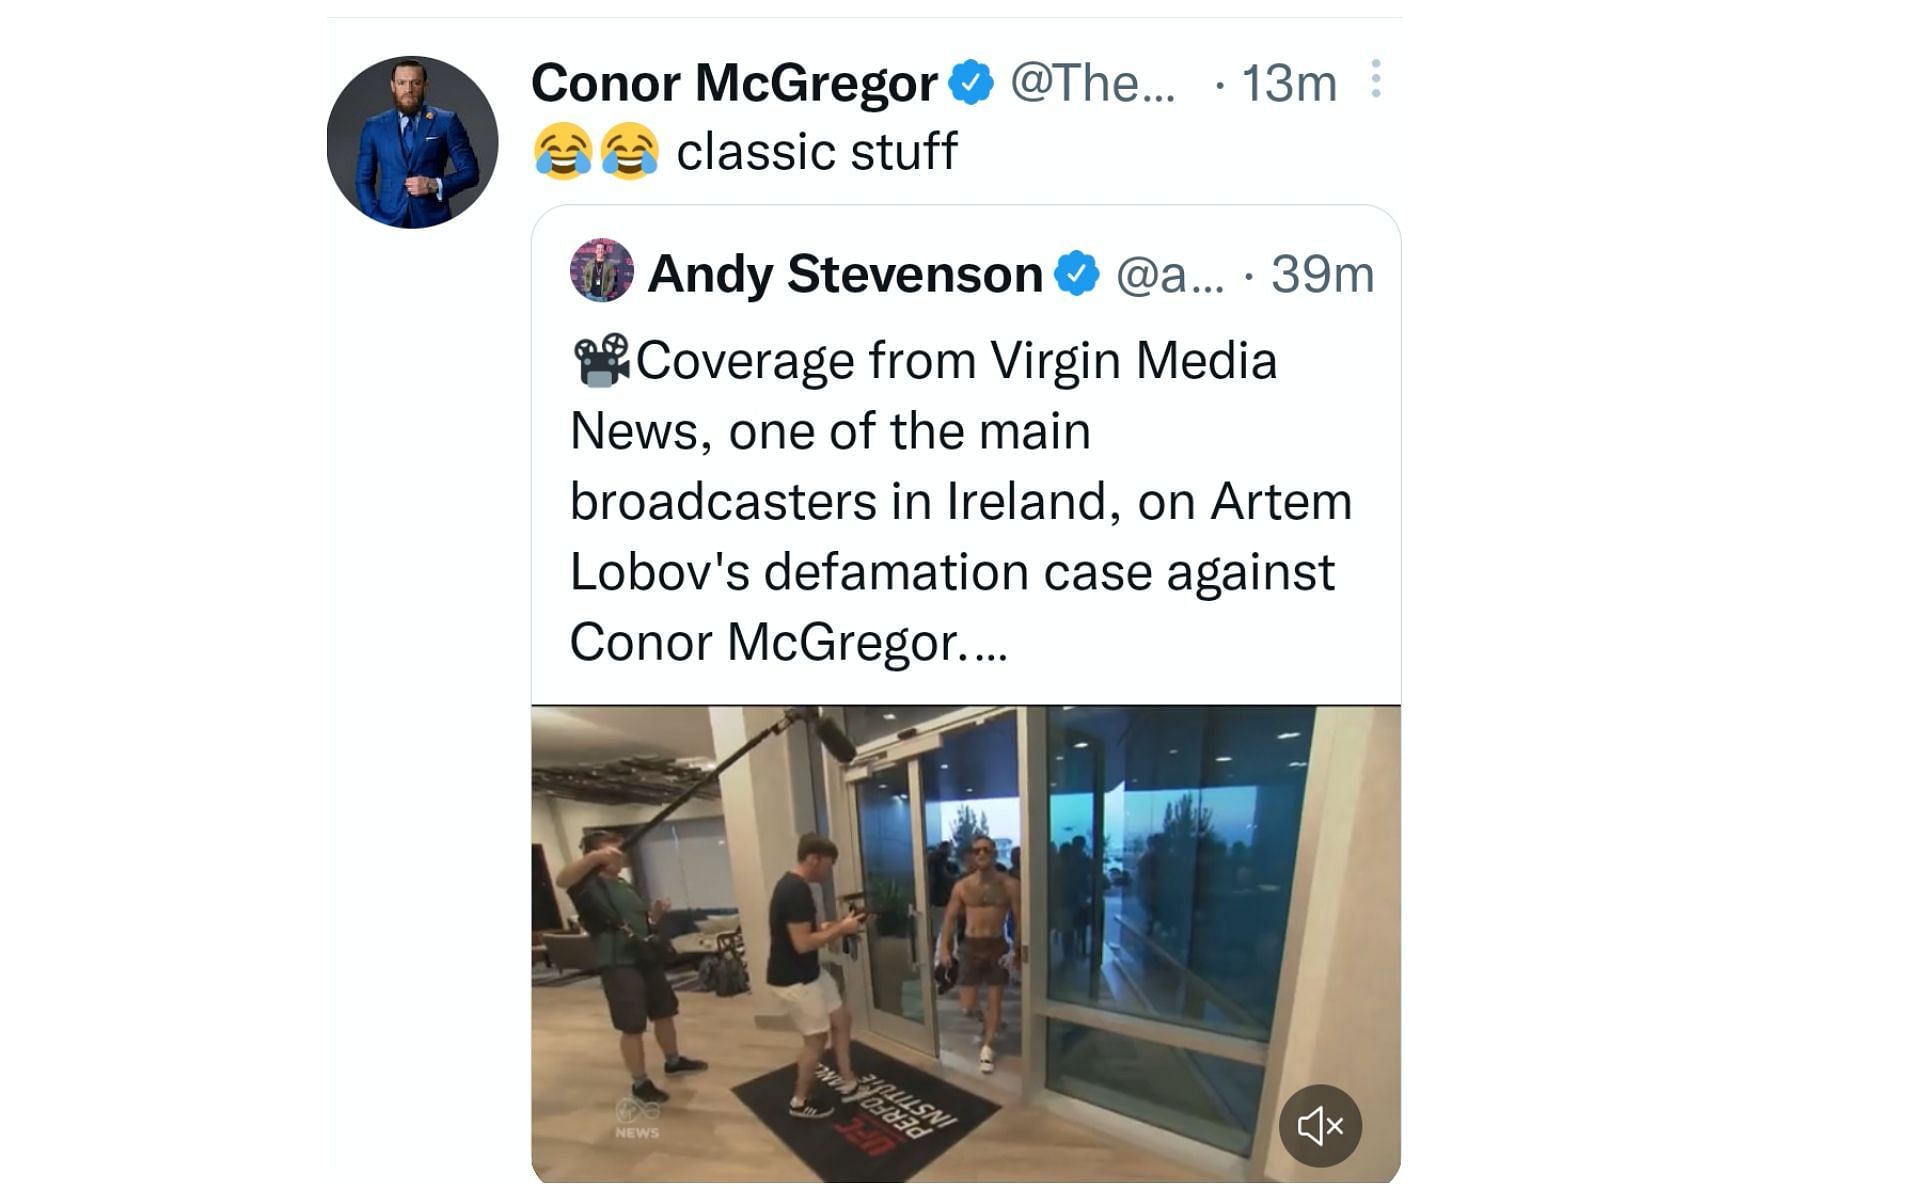 Screenshot from @TheNotoriousMMA on Twitter